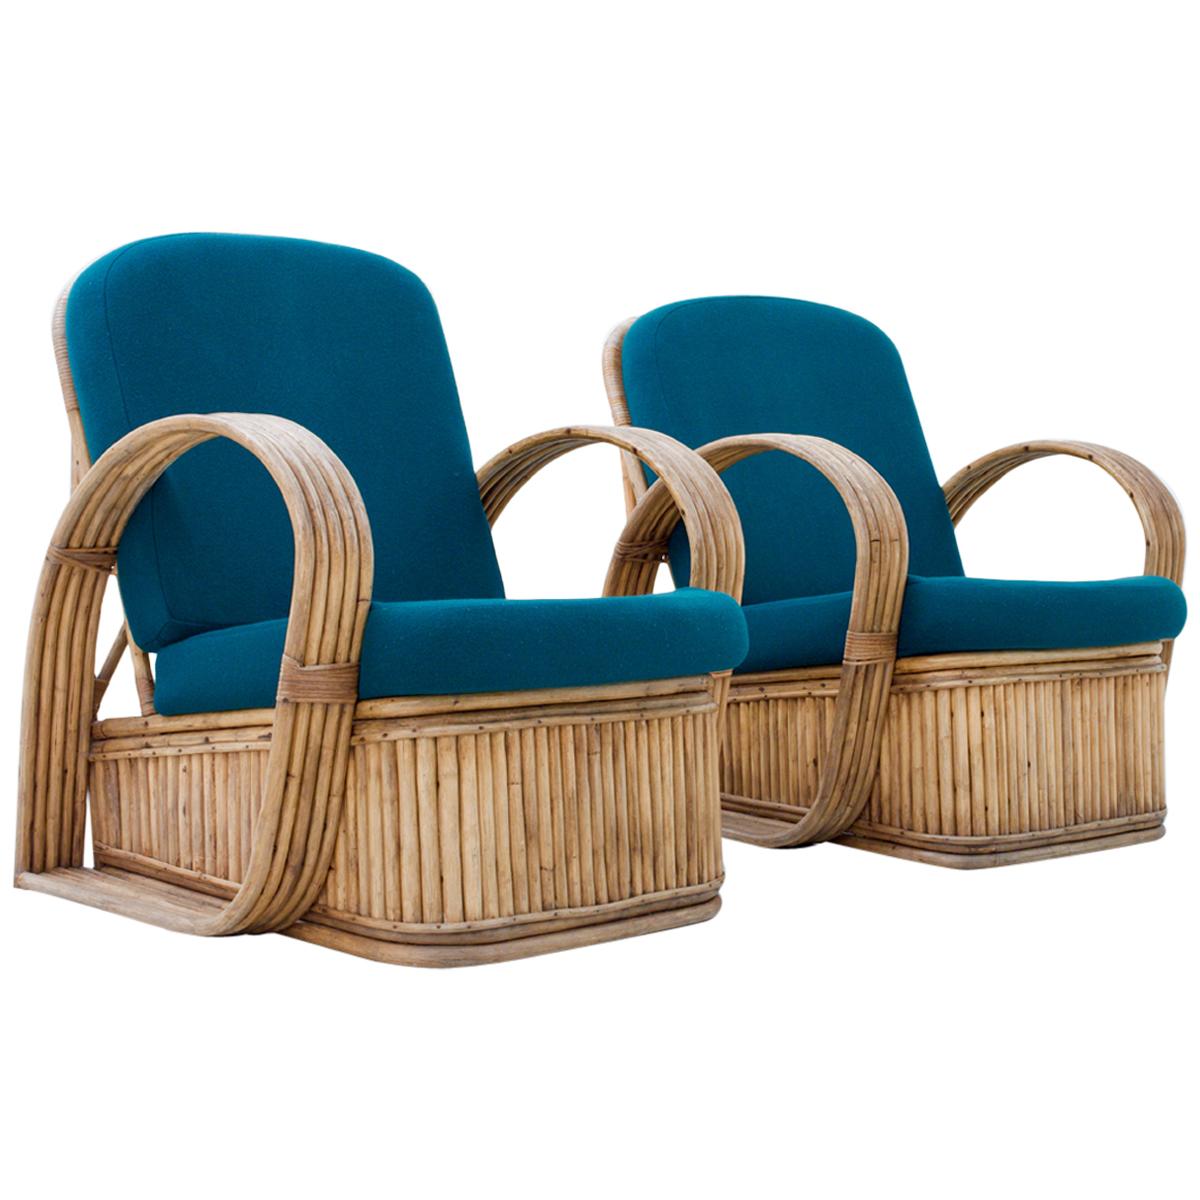 Set of Two Rattan Chairs in Newly Reupholstered Green Wool, Italy, 1950s For Sale